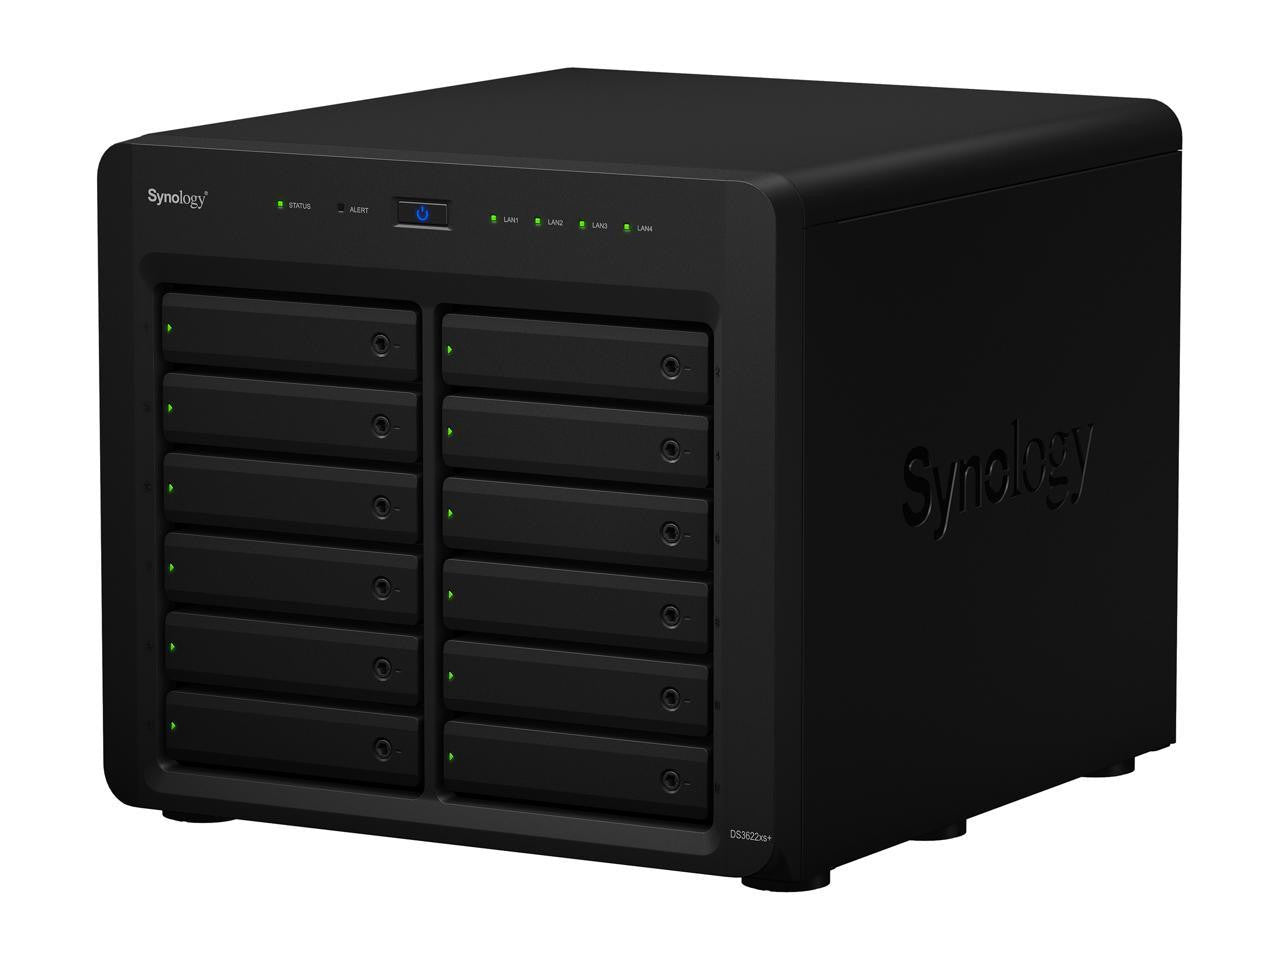 DS3622xs+ 12-BAY DiskStation with 48GB RAM and 192TB (12 x 16TB) of HAT5300 Synology Enterprise Drives